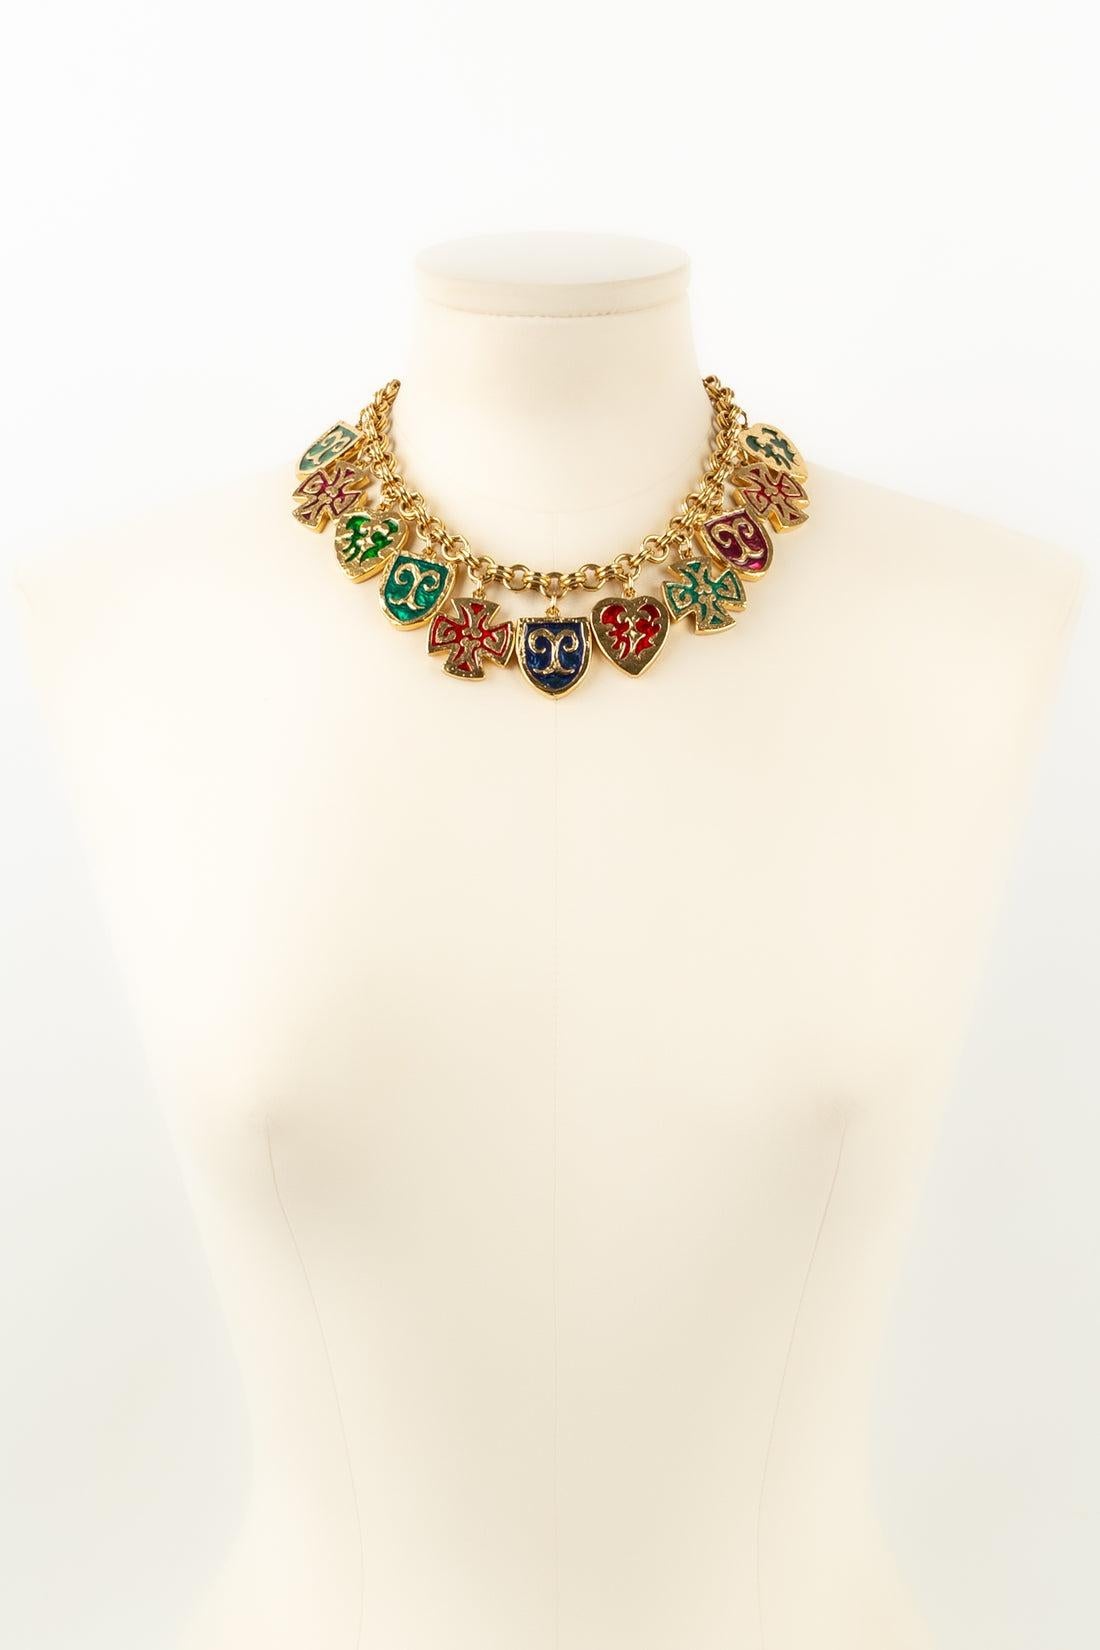 Yves Saint Laurent Short Necklace in Gold-Plated Metal and Enamel For Sale 6